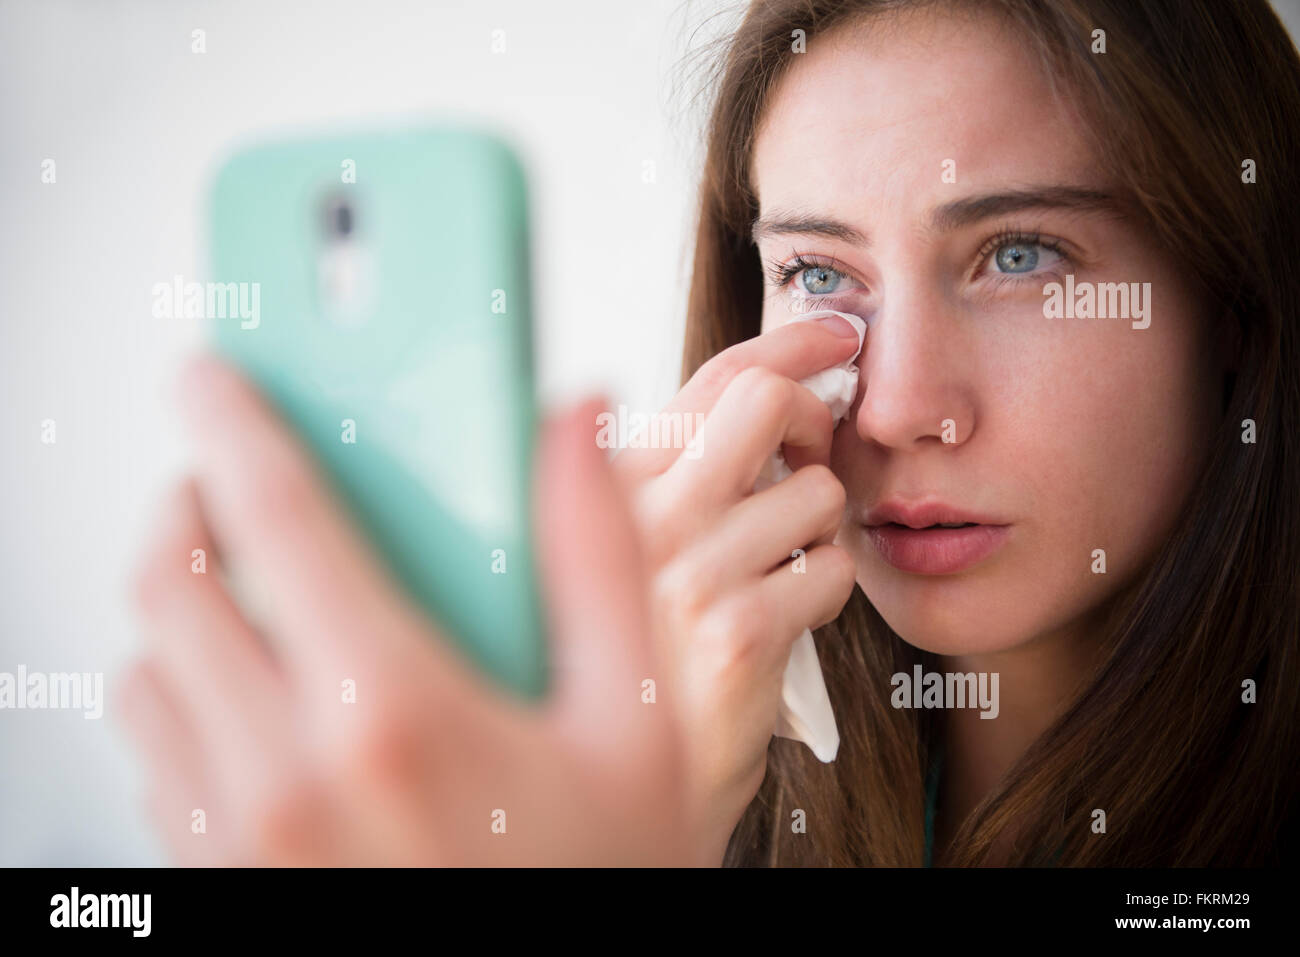 Native American woman with cell phone wiping away tears Stock Photo